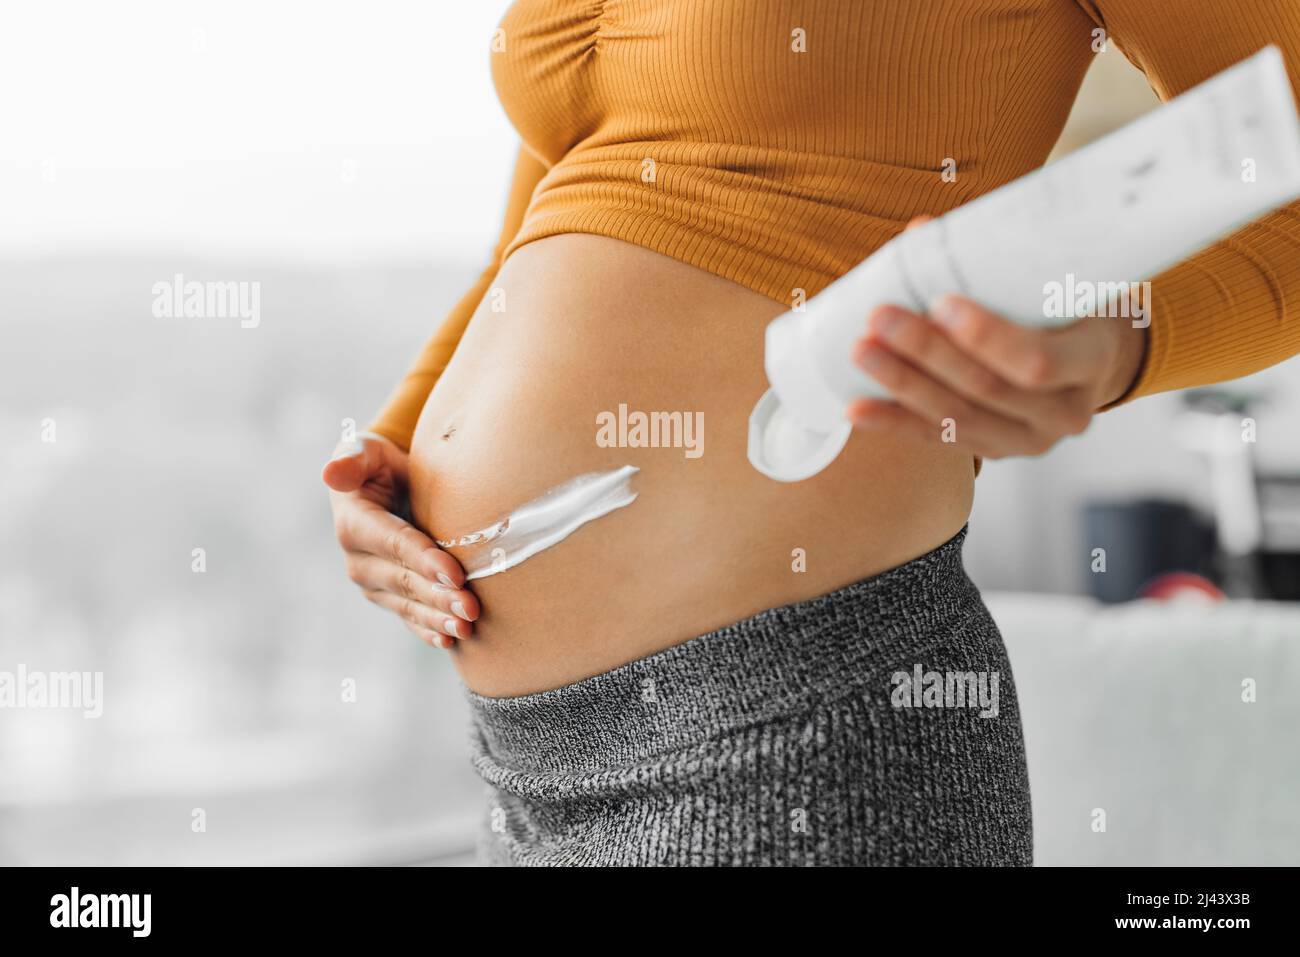 Pregnancy skincare. Pregnant woman applying cream on stomach for stretch marks. Moisturizing belly closeup of hands and lotion bottle at home Stock Photo